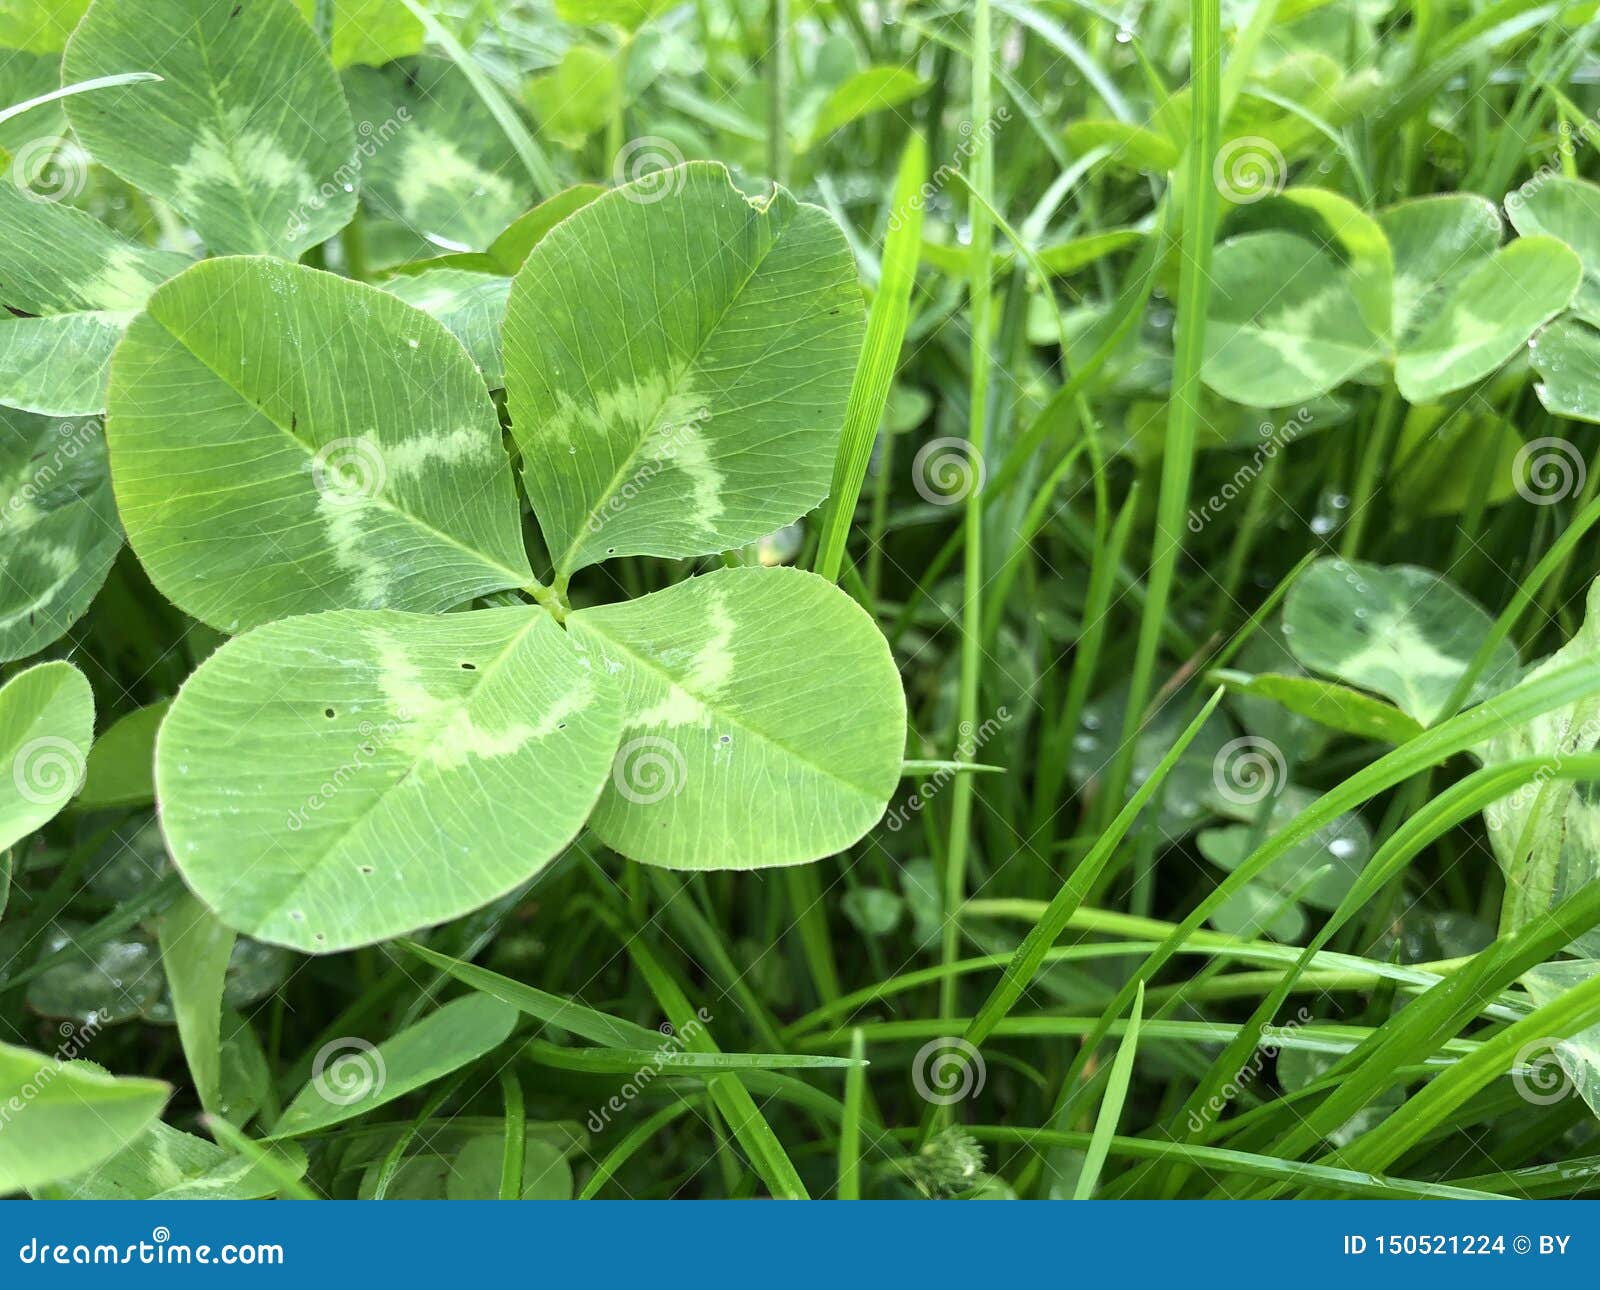 Four-Leaf Clovers: Meaning, Odds of Finding One - Parade